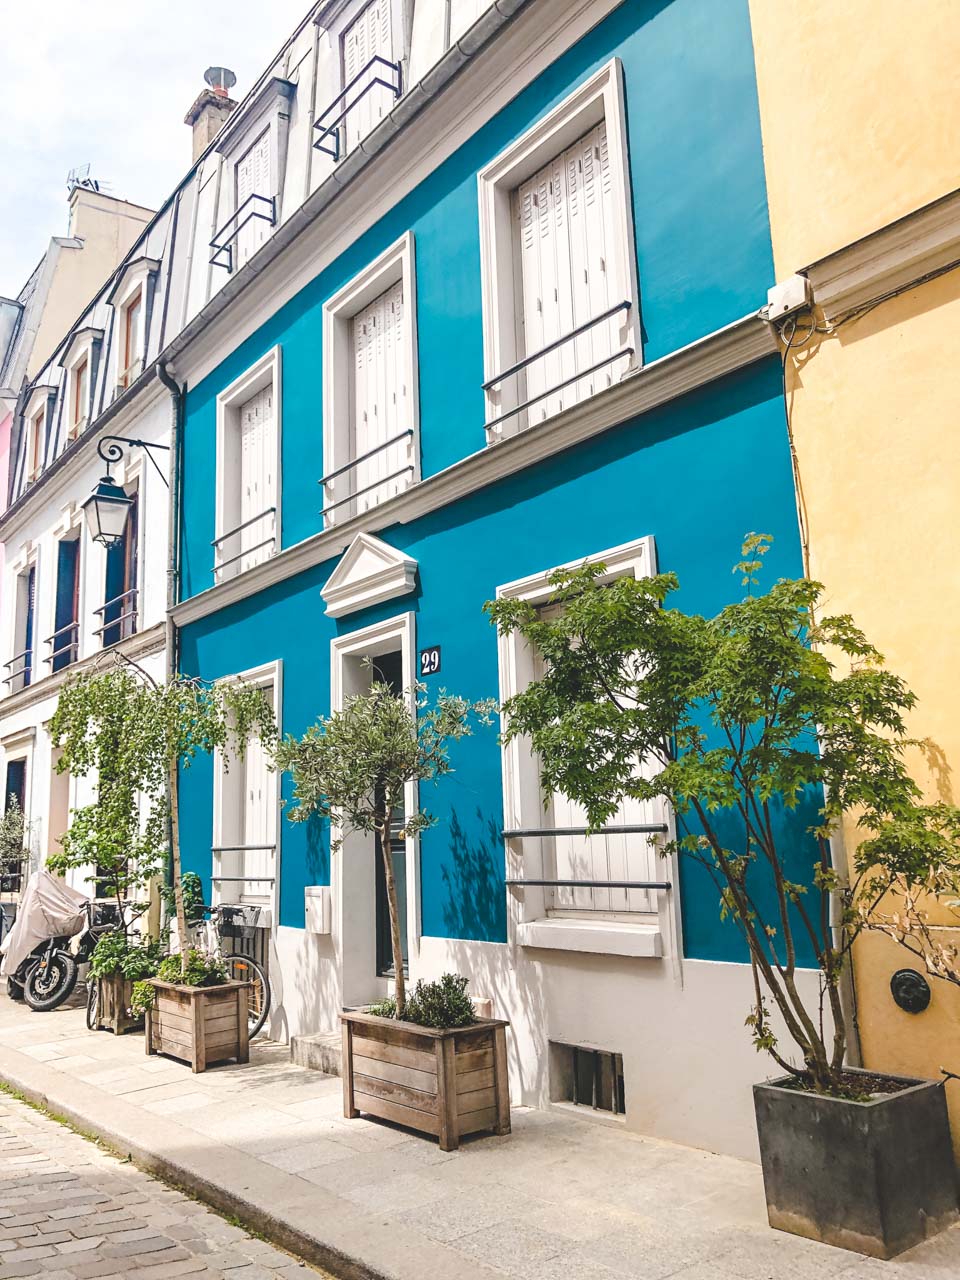 Small trees planted outside a blue house on Rue Crémieux in Paris, France